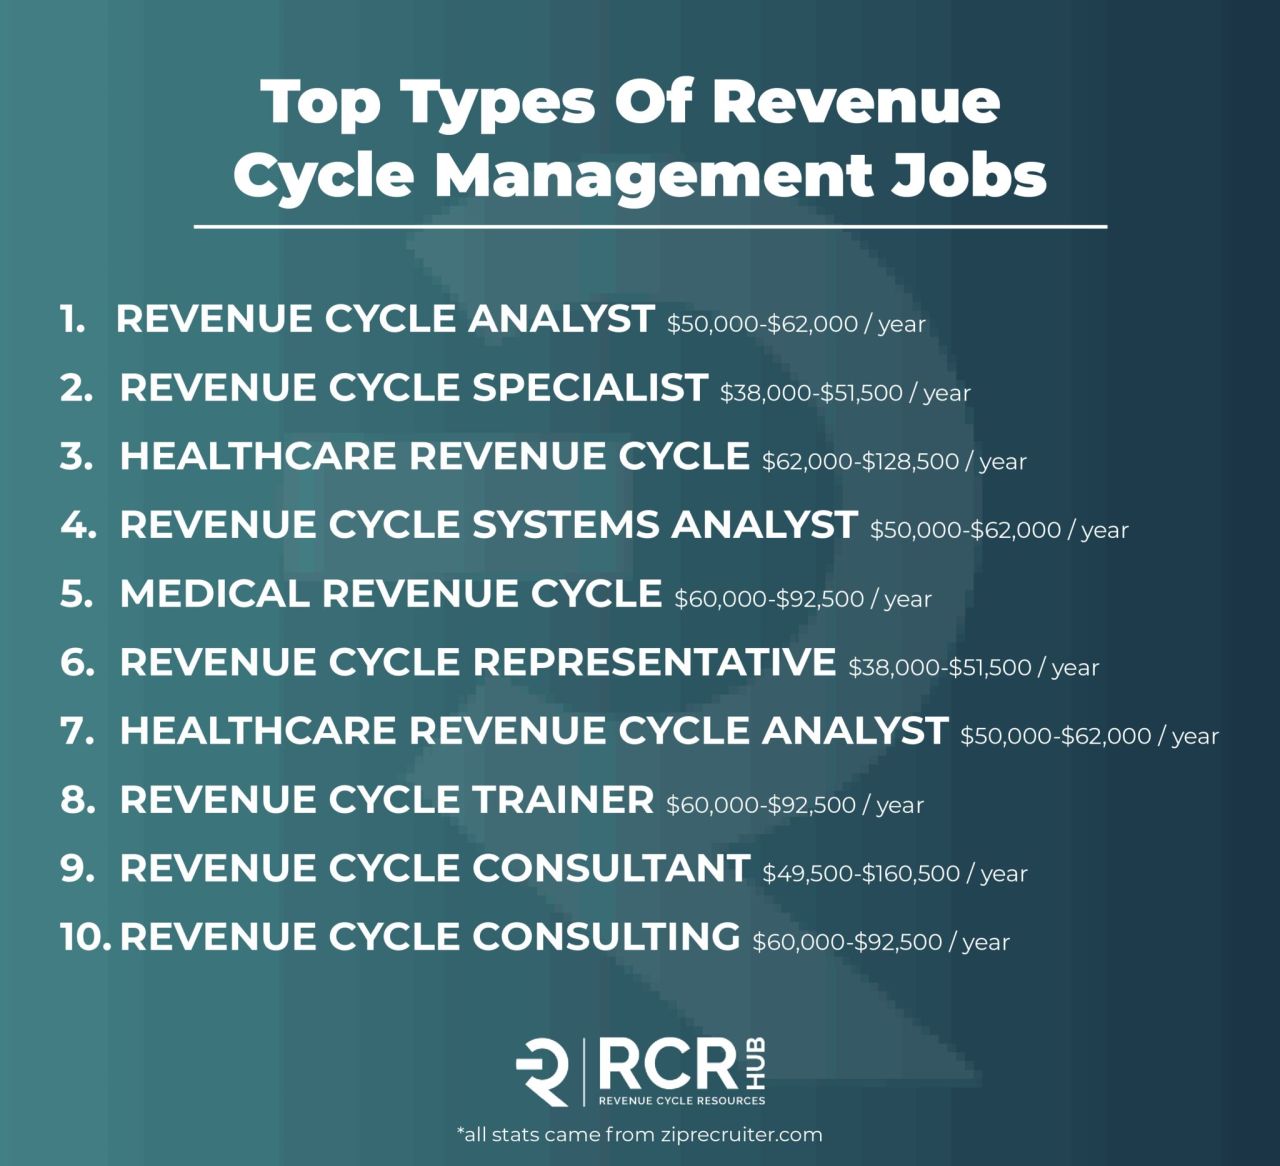 Top Types Of Revenue
Cycle Management Jobs

REVENUE CYCLE ANALYST $50,000$62,000/ year

. REVENUE CYCLE SPECIALIST s35000$51500/ year

. HEALTHCARE REVENUE CYCLE s62000-$128500/ year

. REVENUE CYCLE SYSTEMS ANALYST :50,000-$62,000/ year

. MEDICAL REVENUE CYCLE :60,000-$92500/ year

. REVENUE CYCLE REPRESENTATIVE 38000-35500 / year

. HEALTHCARE REVENUE CYCLE ANALYST ::50,000-$62,000/ year
. REVENUE CYCLE TRAINER 60000592500 year

. REVENUE CYCLE CONSULTANT 549500-$160,500 / year

10. REVENUE CYCLE CONSULTING $60,000-$92,500 / year

OW 0 NO LL NN WW NH